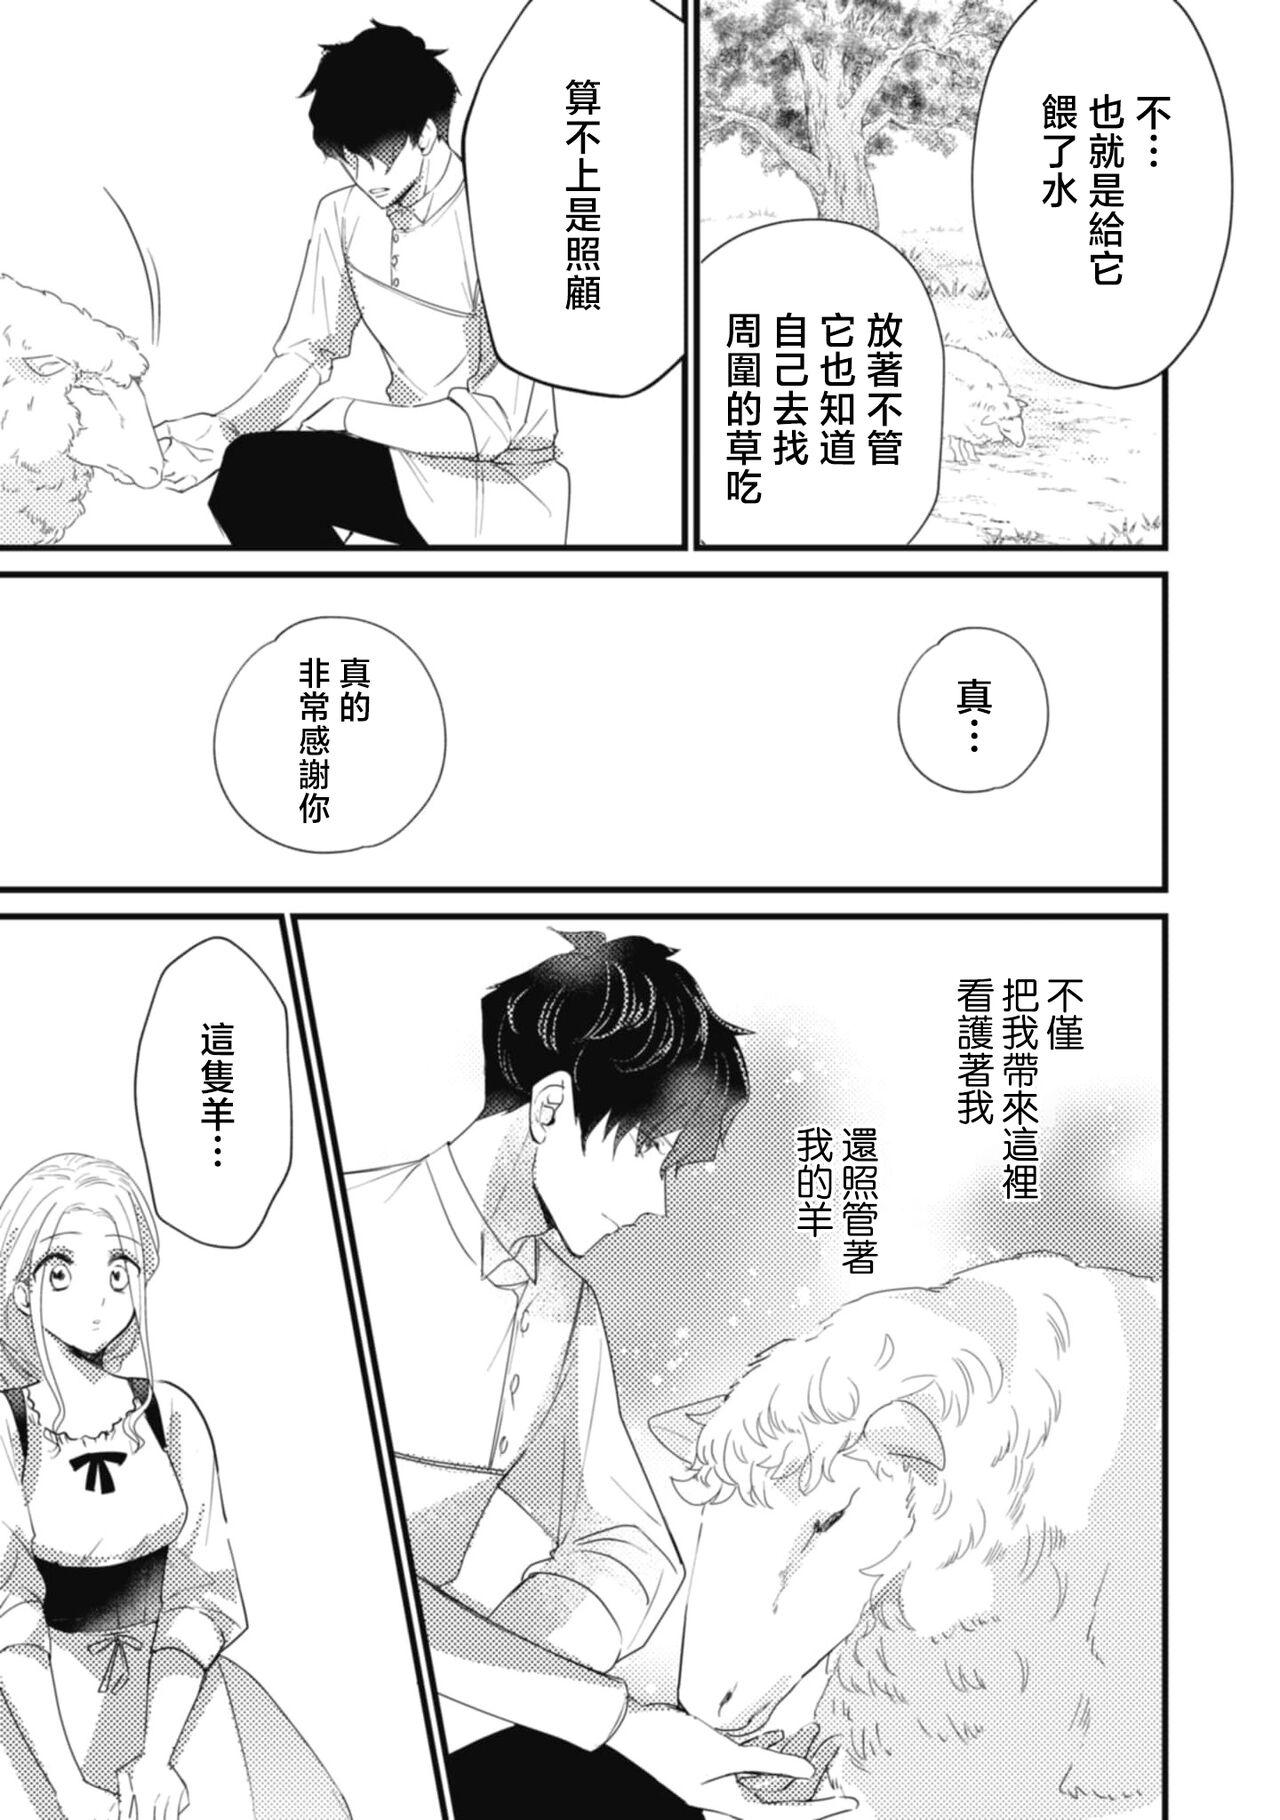 A shepherd in love with a demoted knight | 与被贬骑士相爱的牧羊女1 26